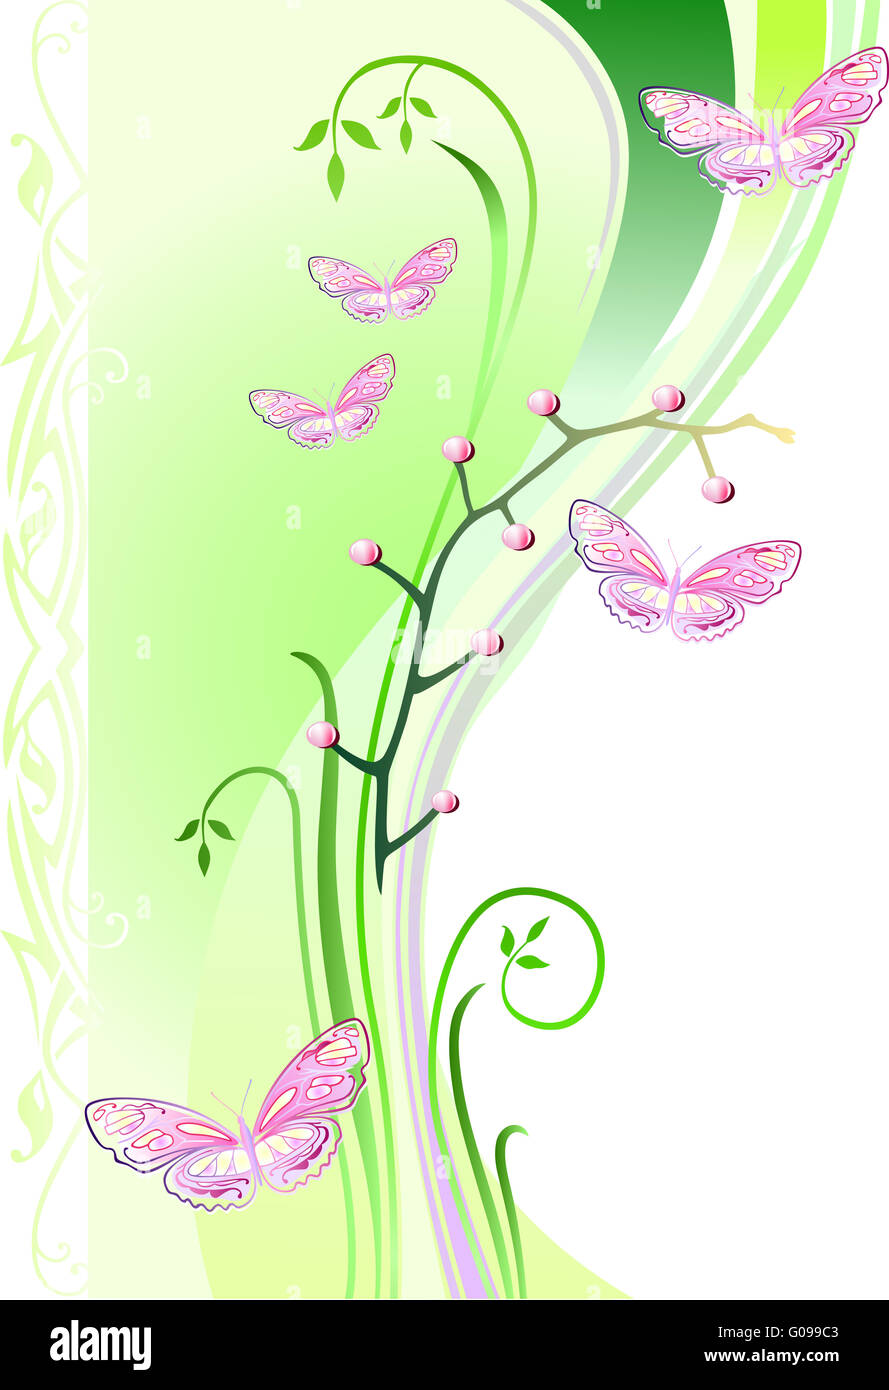 Orchids and butterflies on green waved background Stock Photo